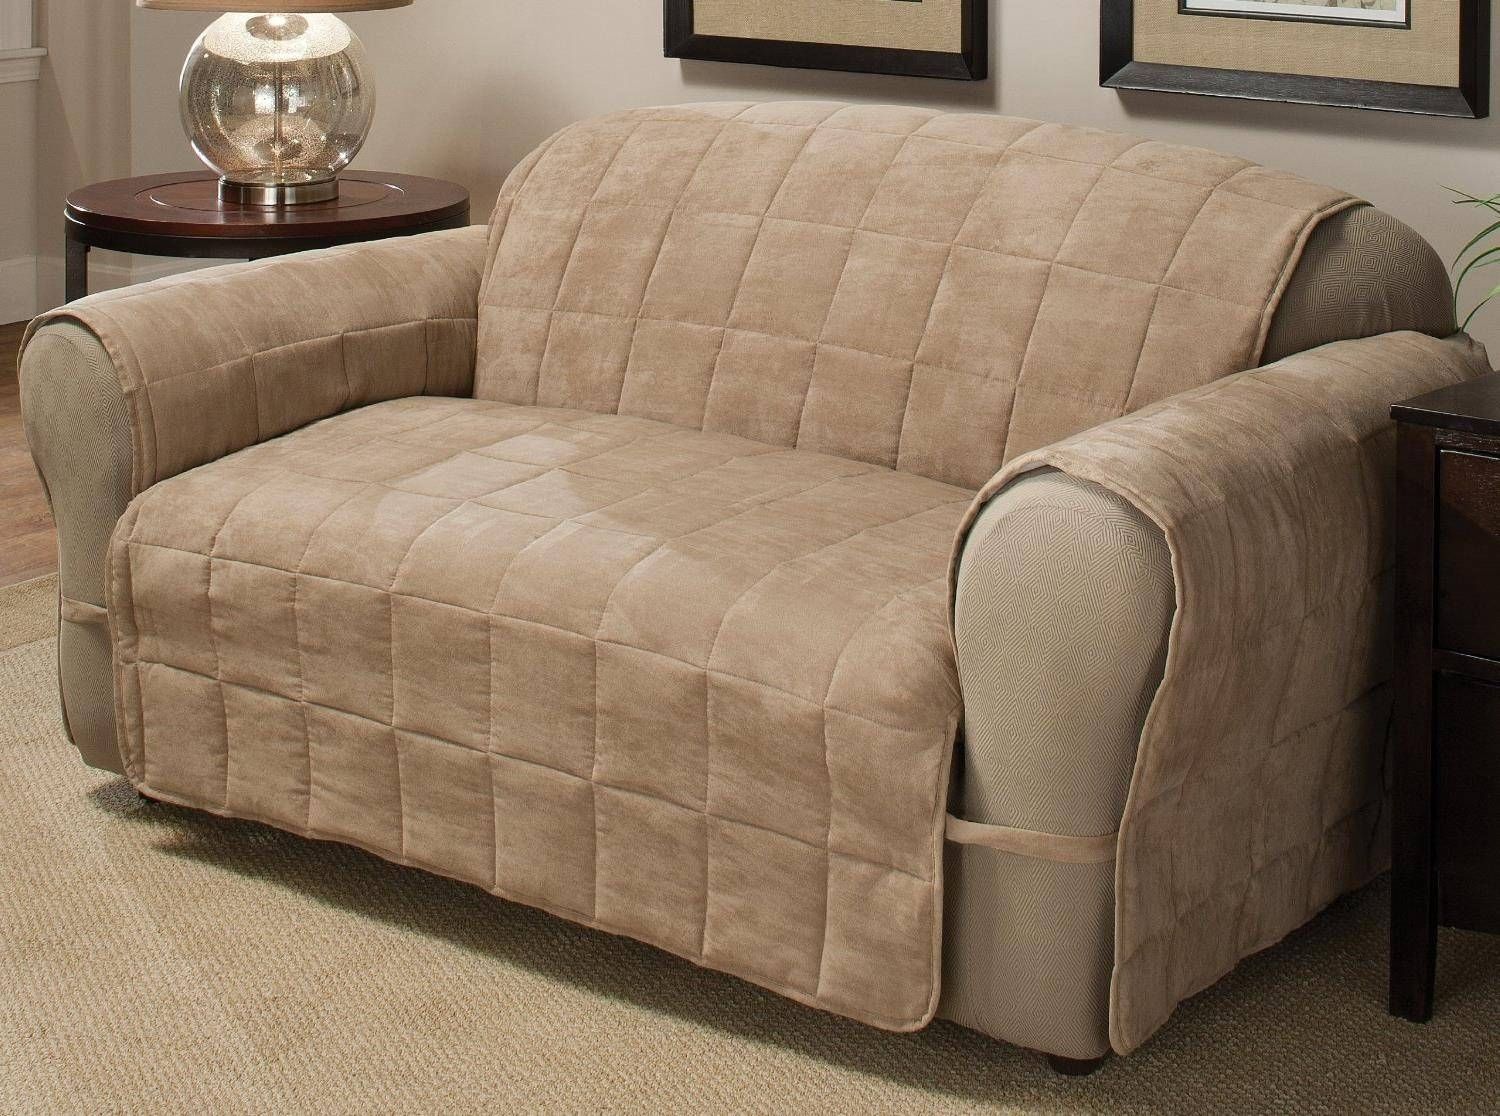 sofa covers for leather sofas india